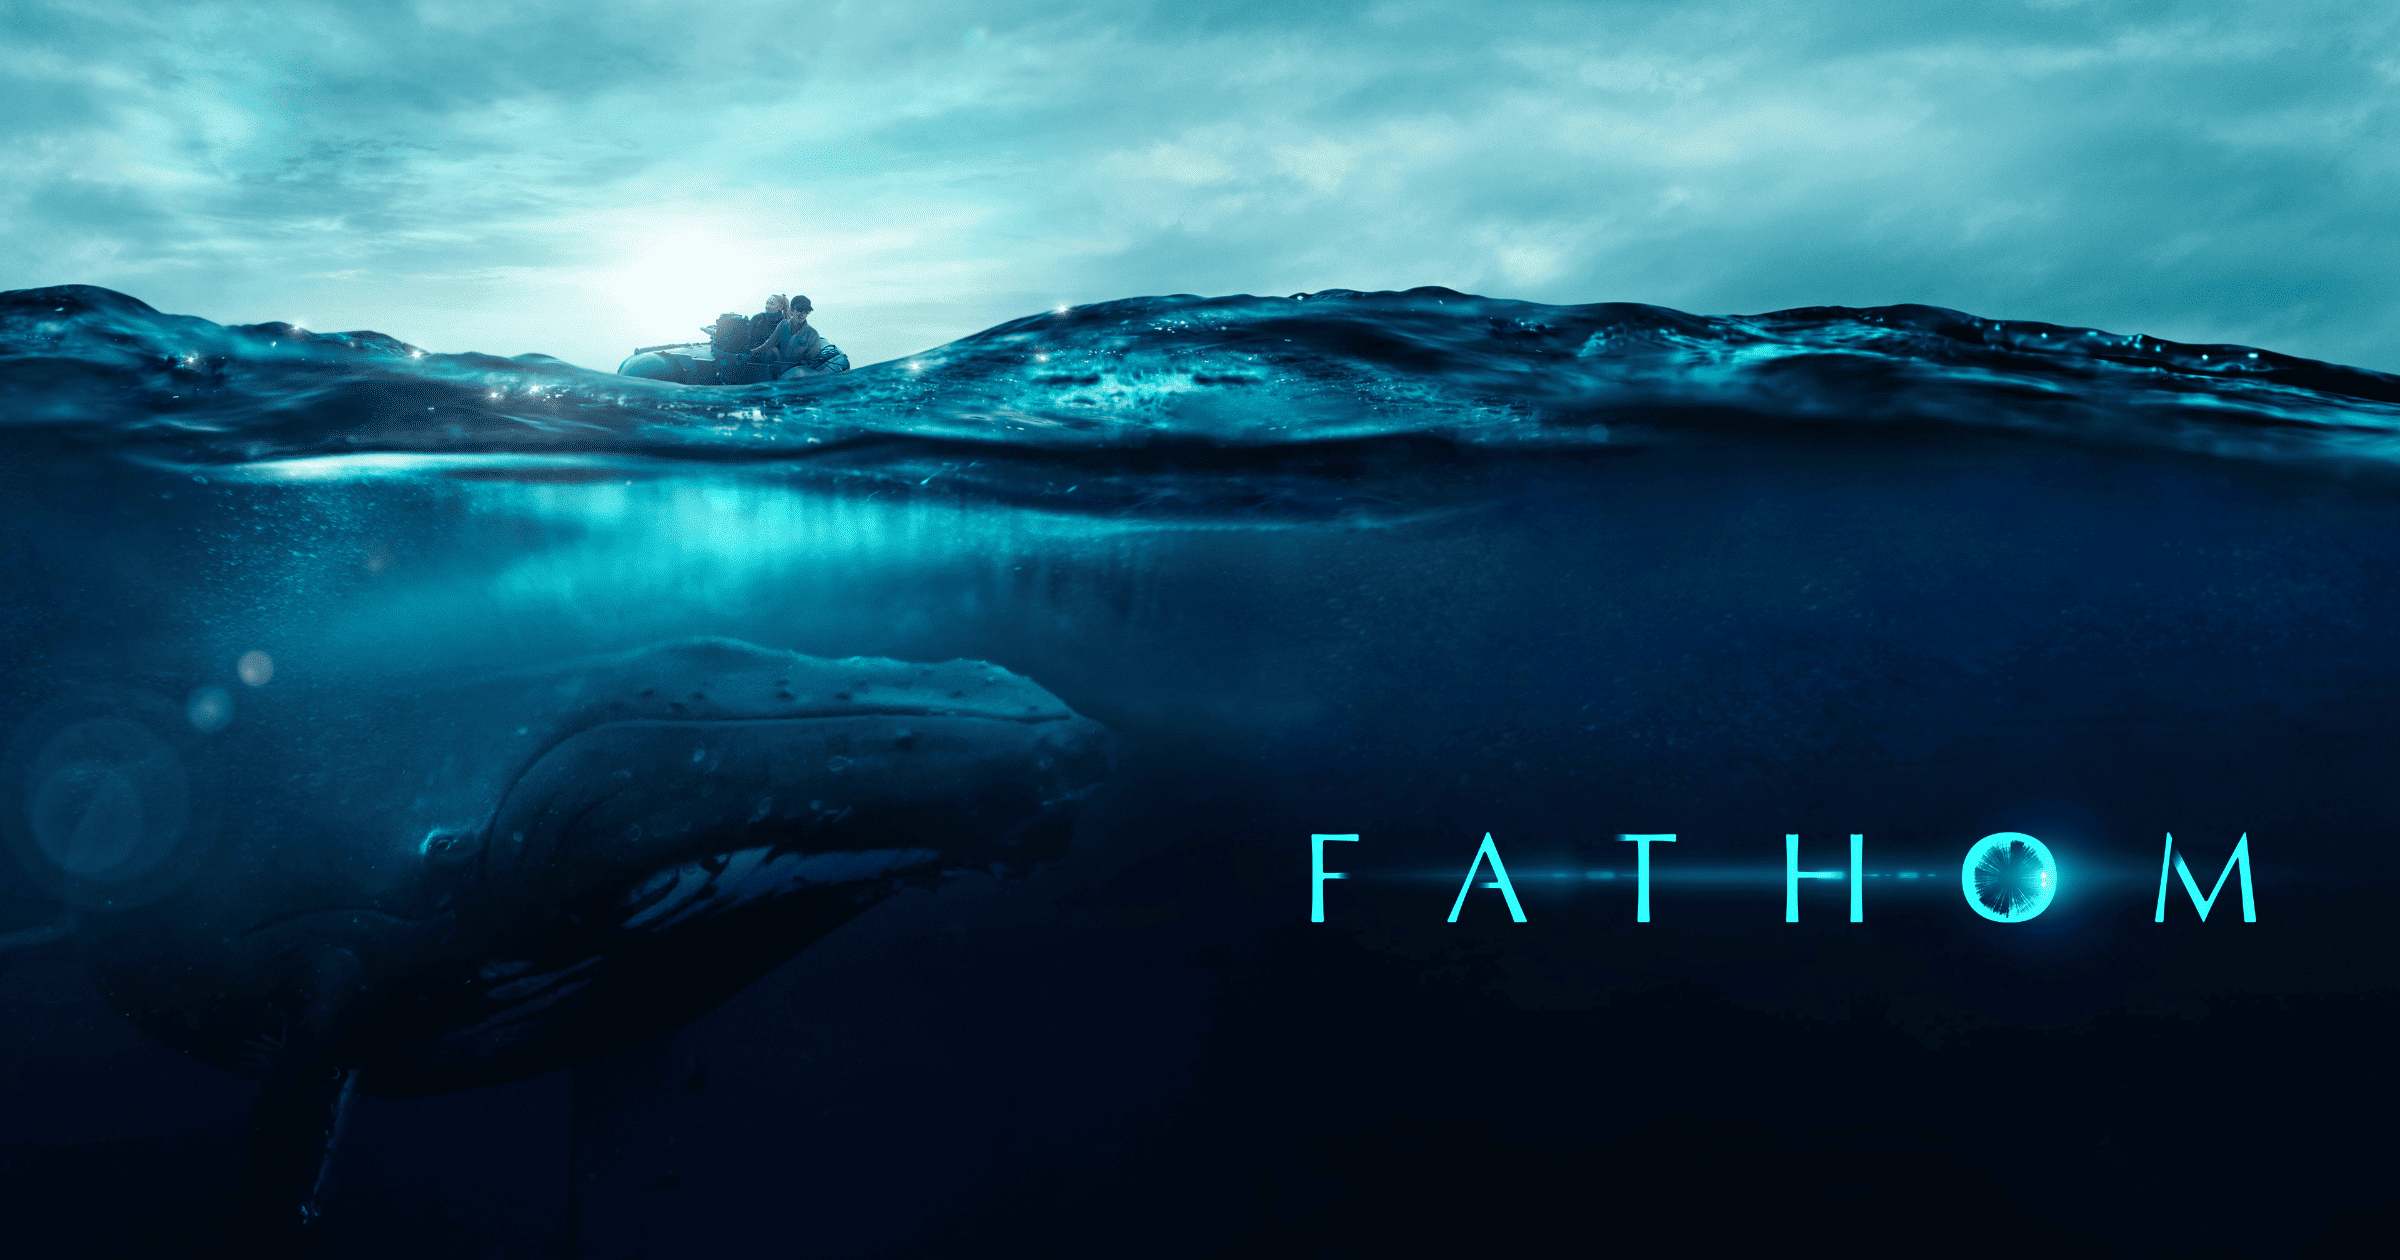 Humpback Whale Documentary ‘Fathom’ to Premiere on Apple TV+ on June 25